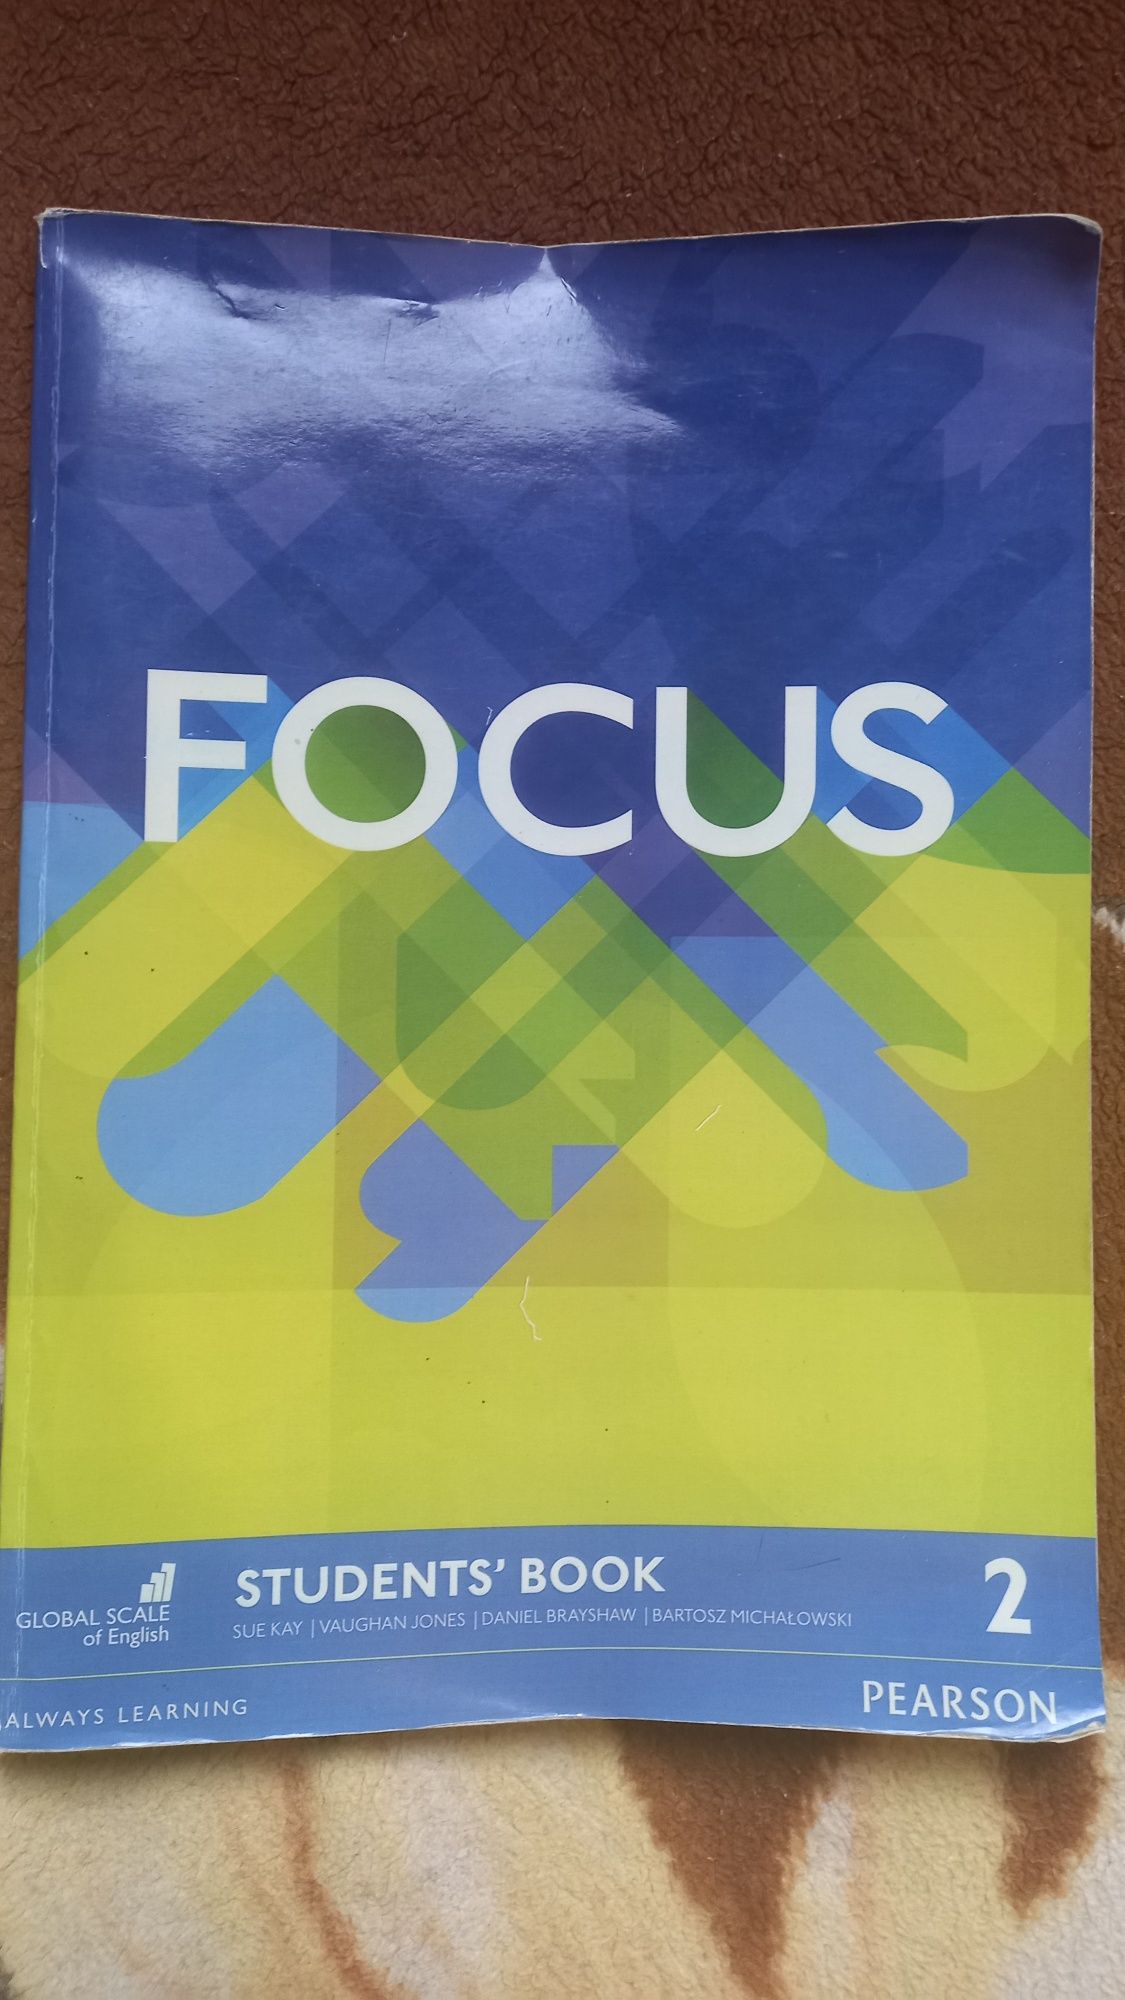 Focus students book,WB